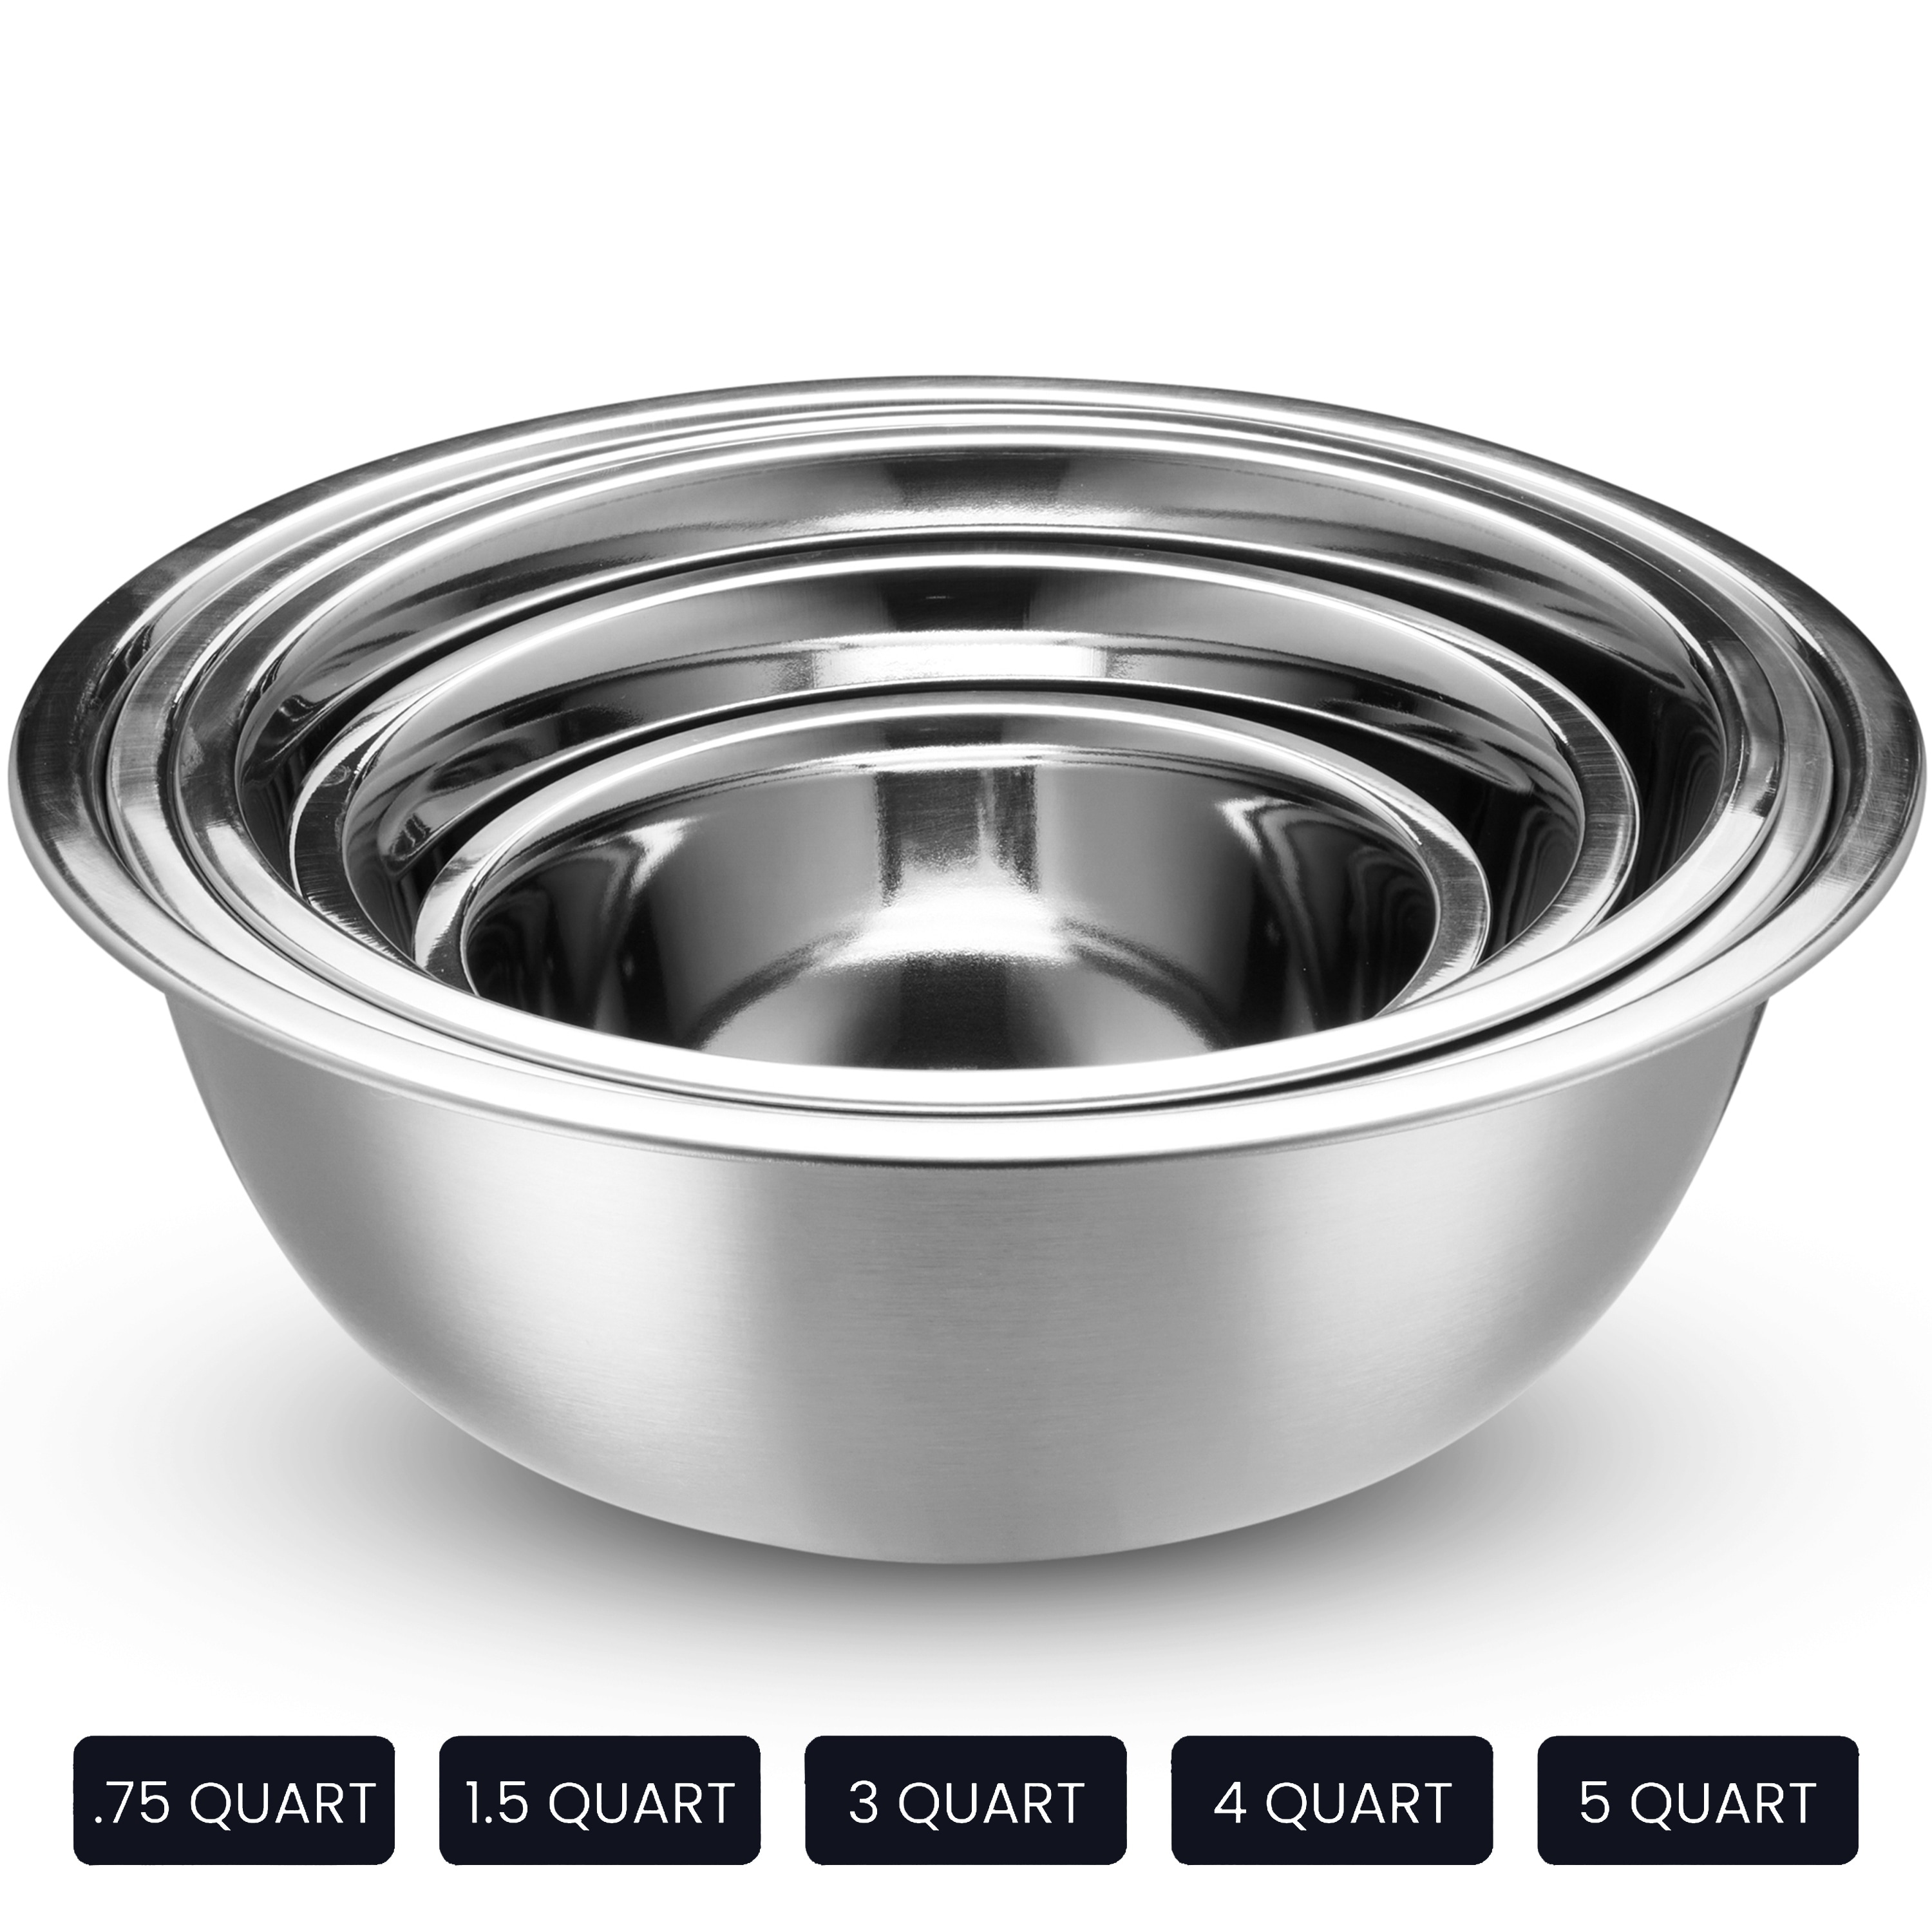 KPKitchen Stainless Steel Mixing Bowls with Lids Set of 5